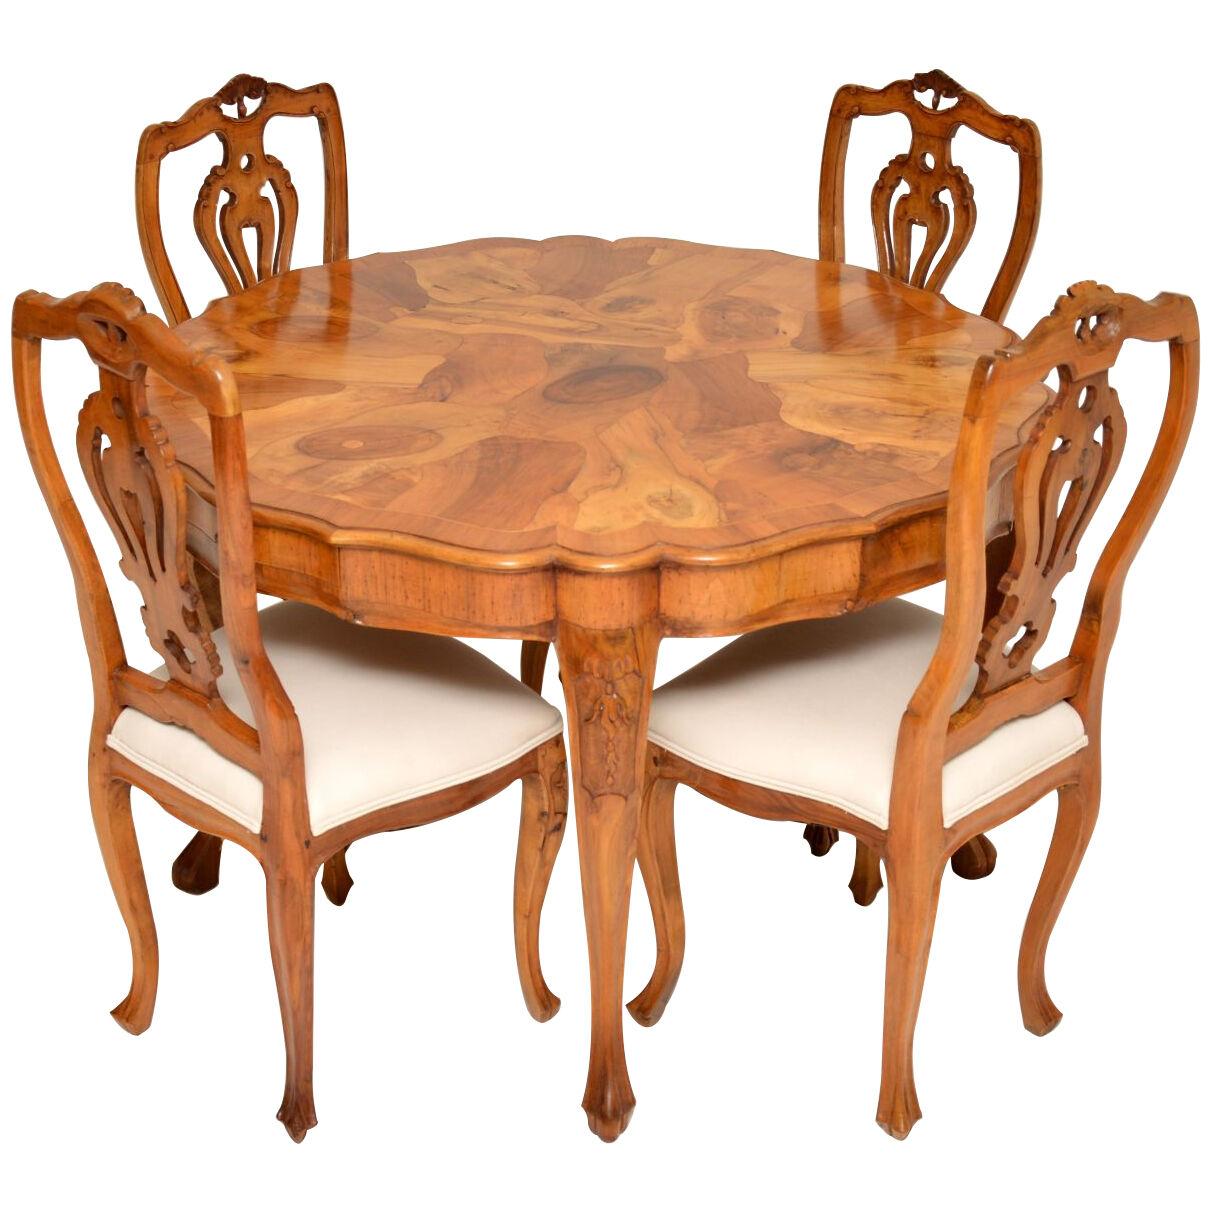 Antique Dutch Olive Wood Dining Table & Chairs